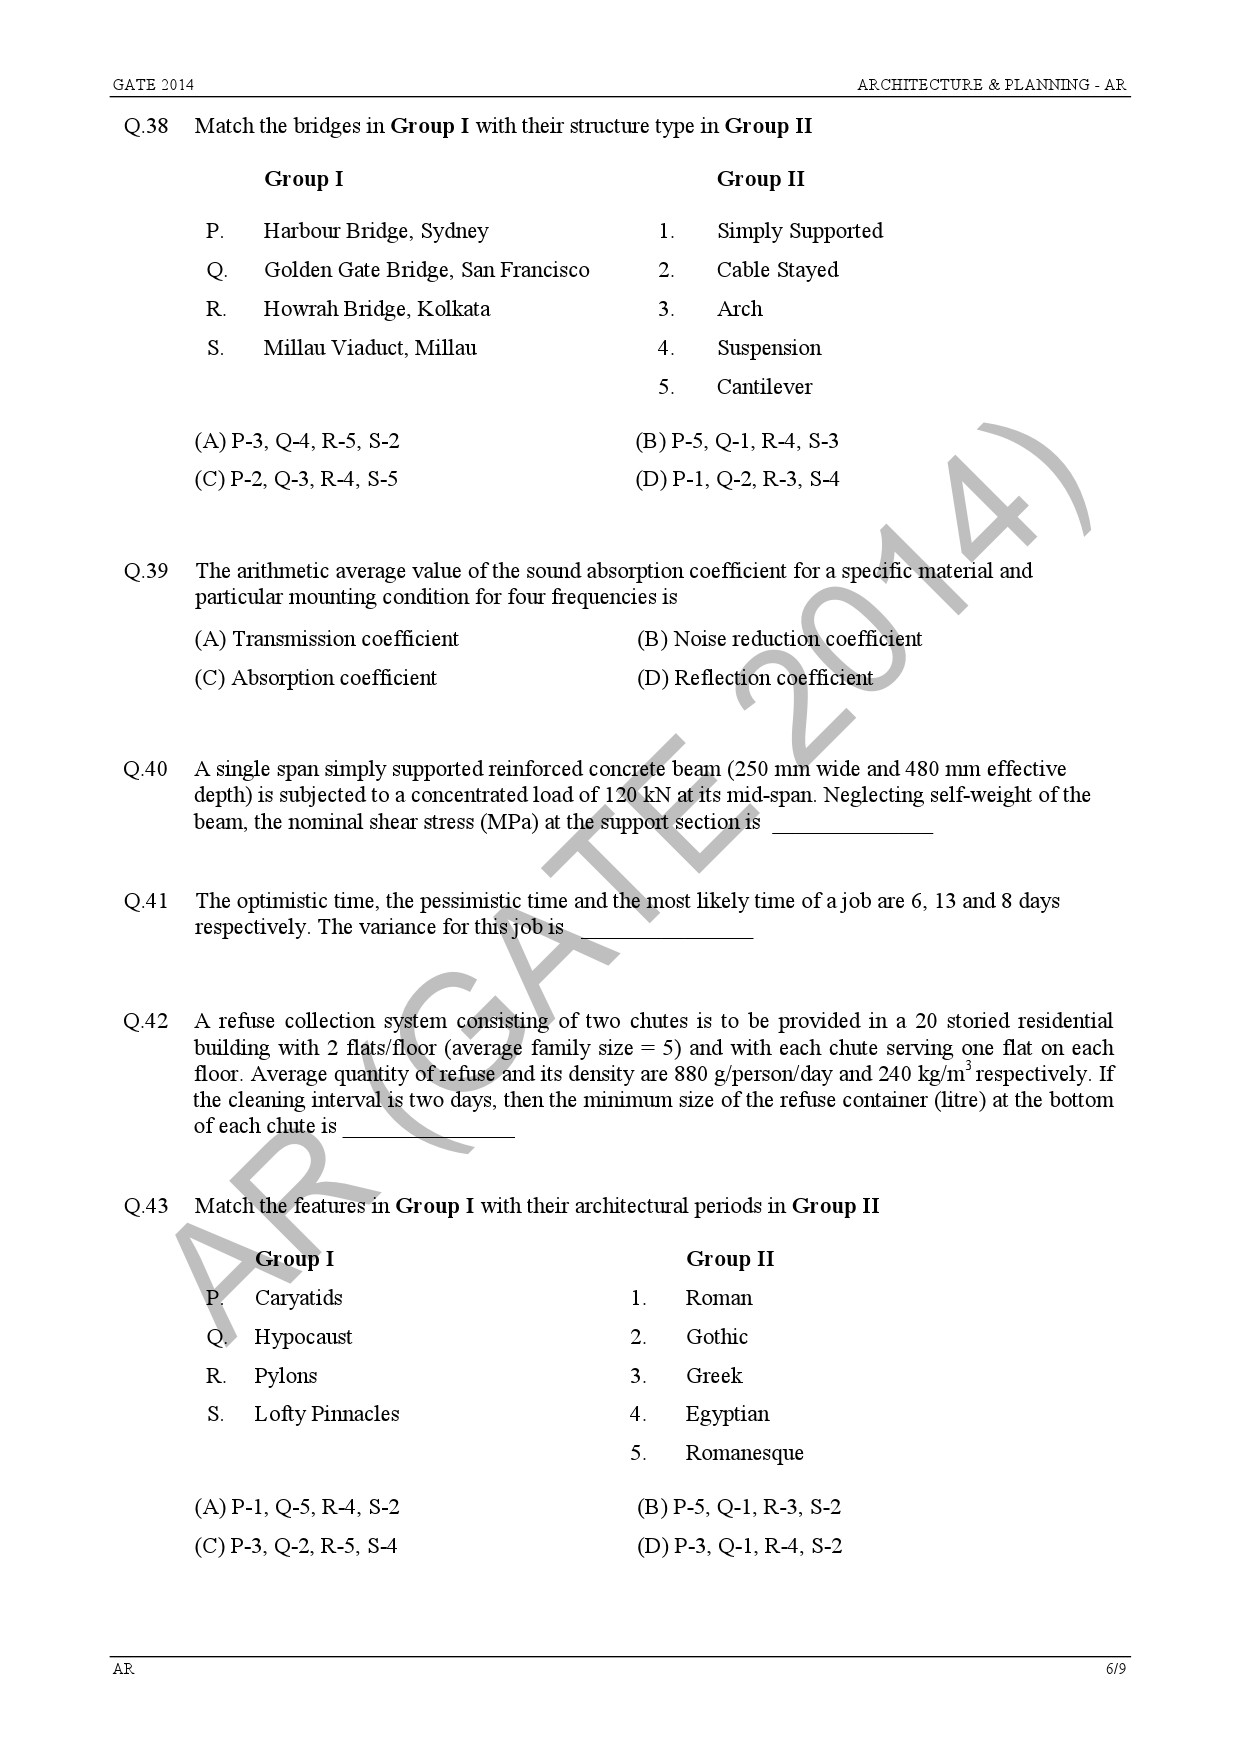 GATE Exam Question Paper 2014 Architecture and Planning 12